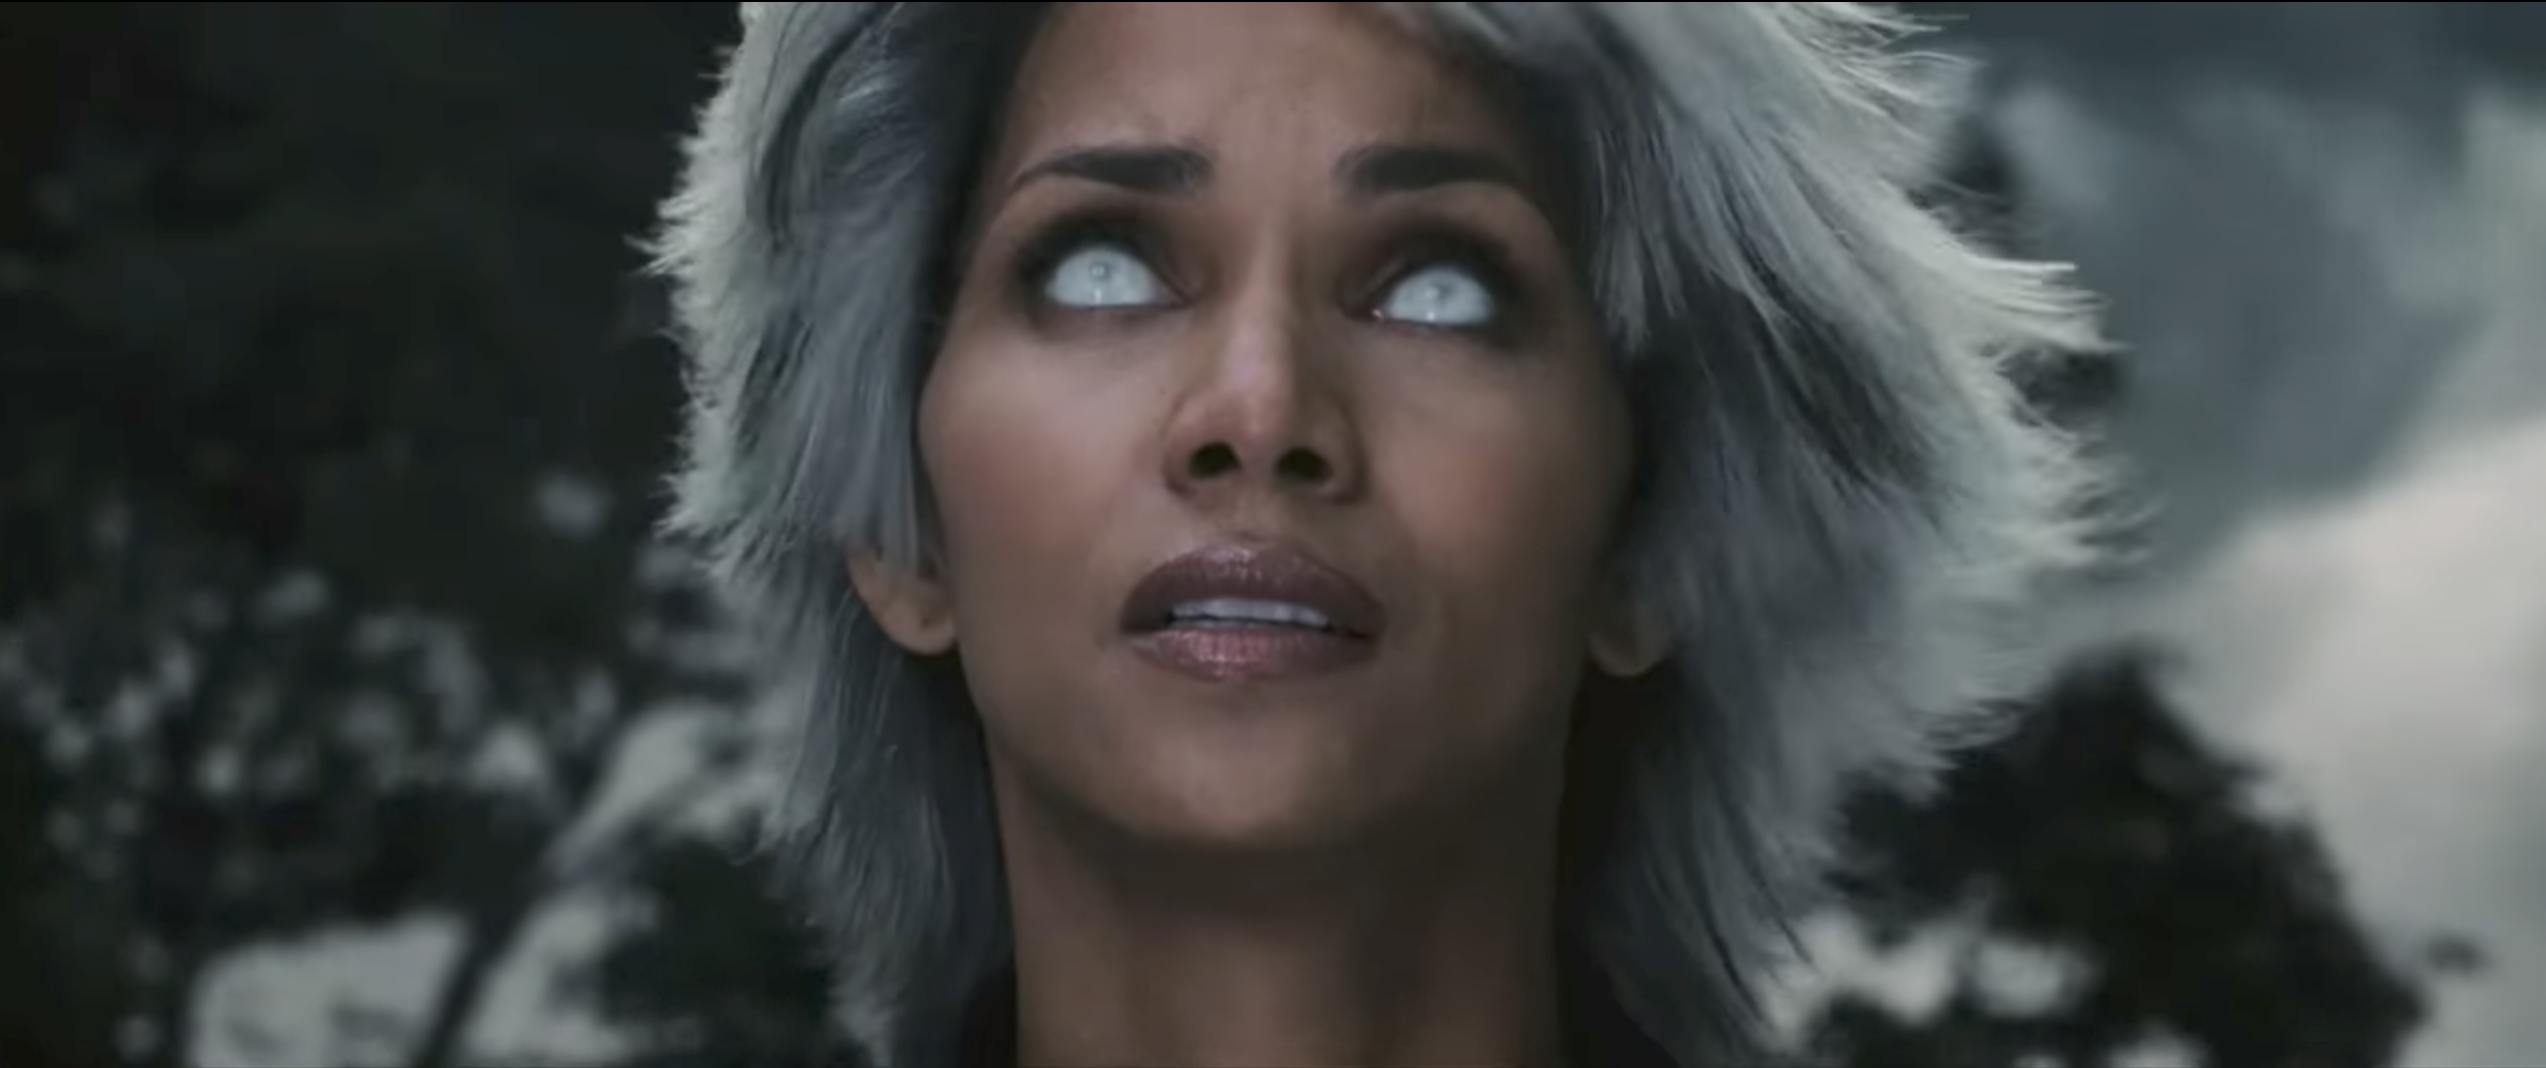 X Men Movies in Order : Storm in 'X-Men: The Last Stand.'